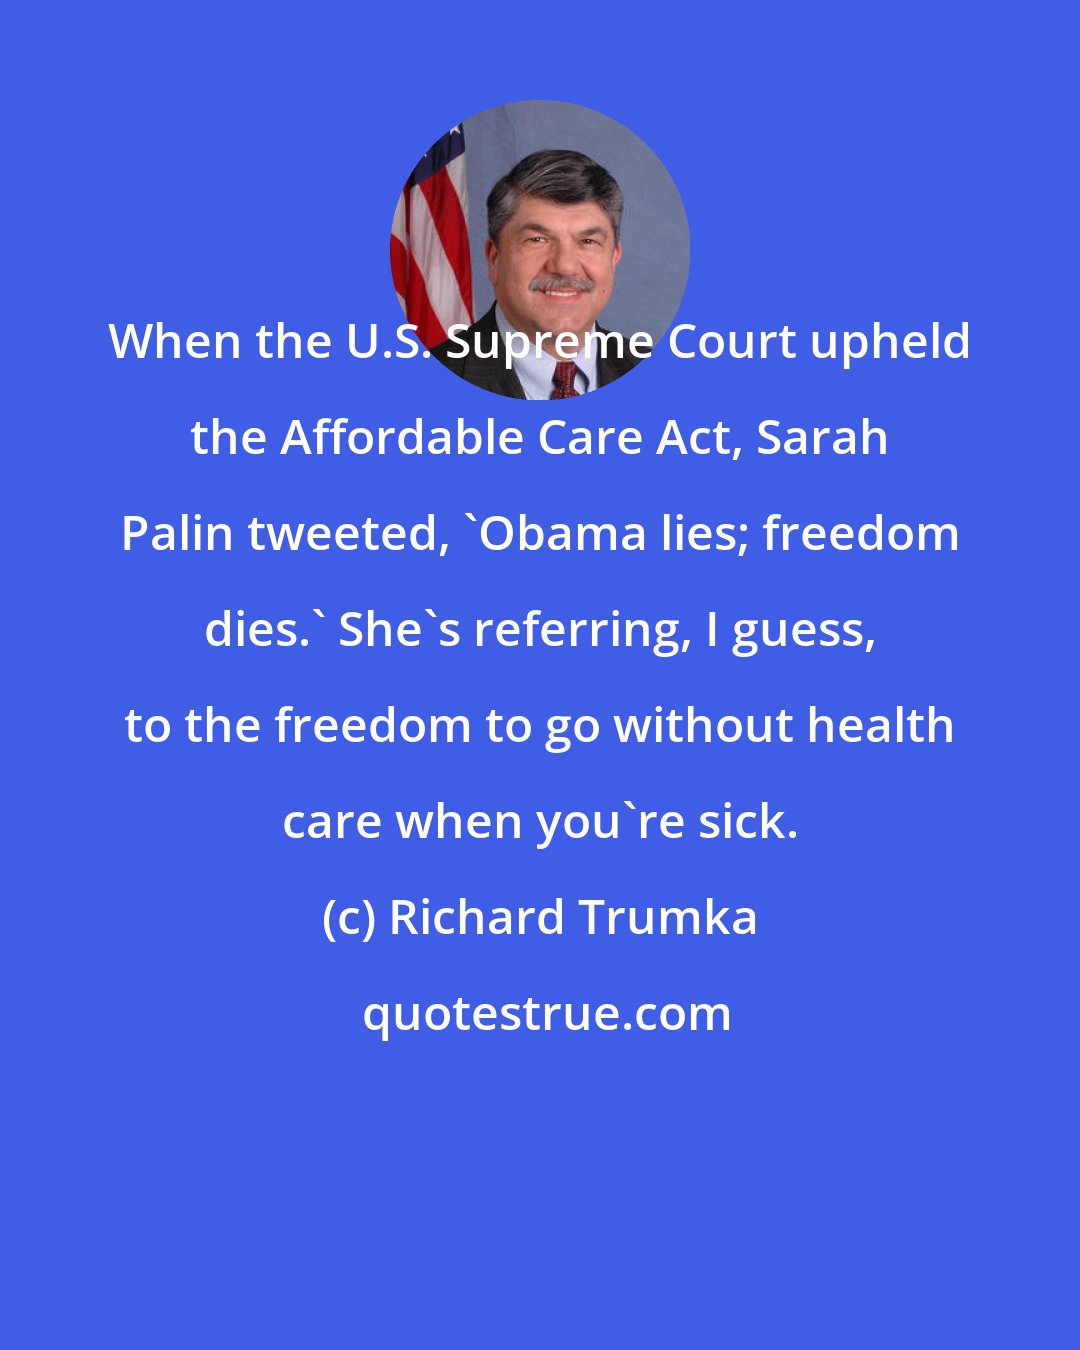 Richard Trumka: When the U.S. Supreme Court upheld the Affordable Care Act, Sarah Palin tweeted, 'Obama lies; freedom dies.' She's referring, I guess, to the freedom to go without health care when you're sick.